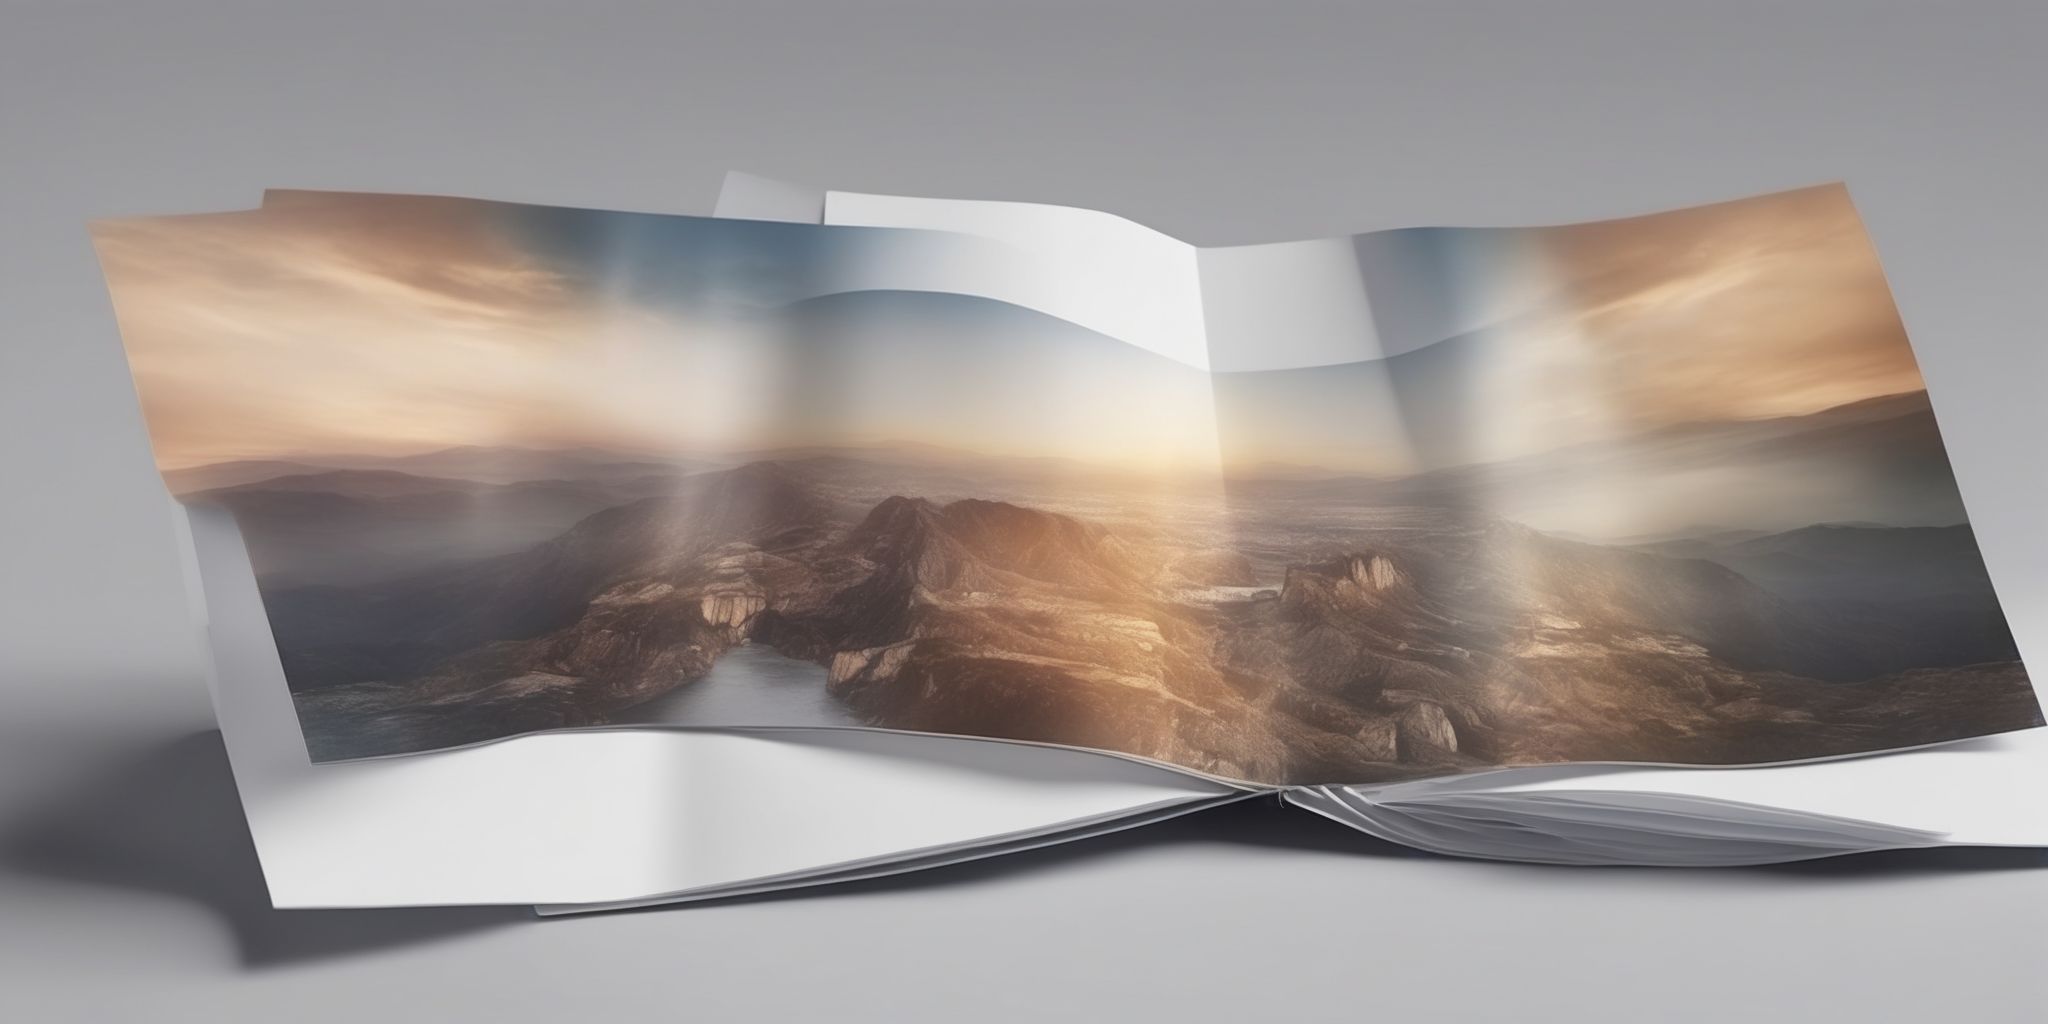 Folder  in realistic, photographic style